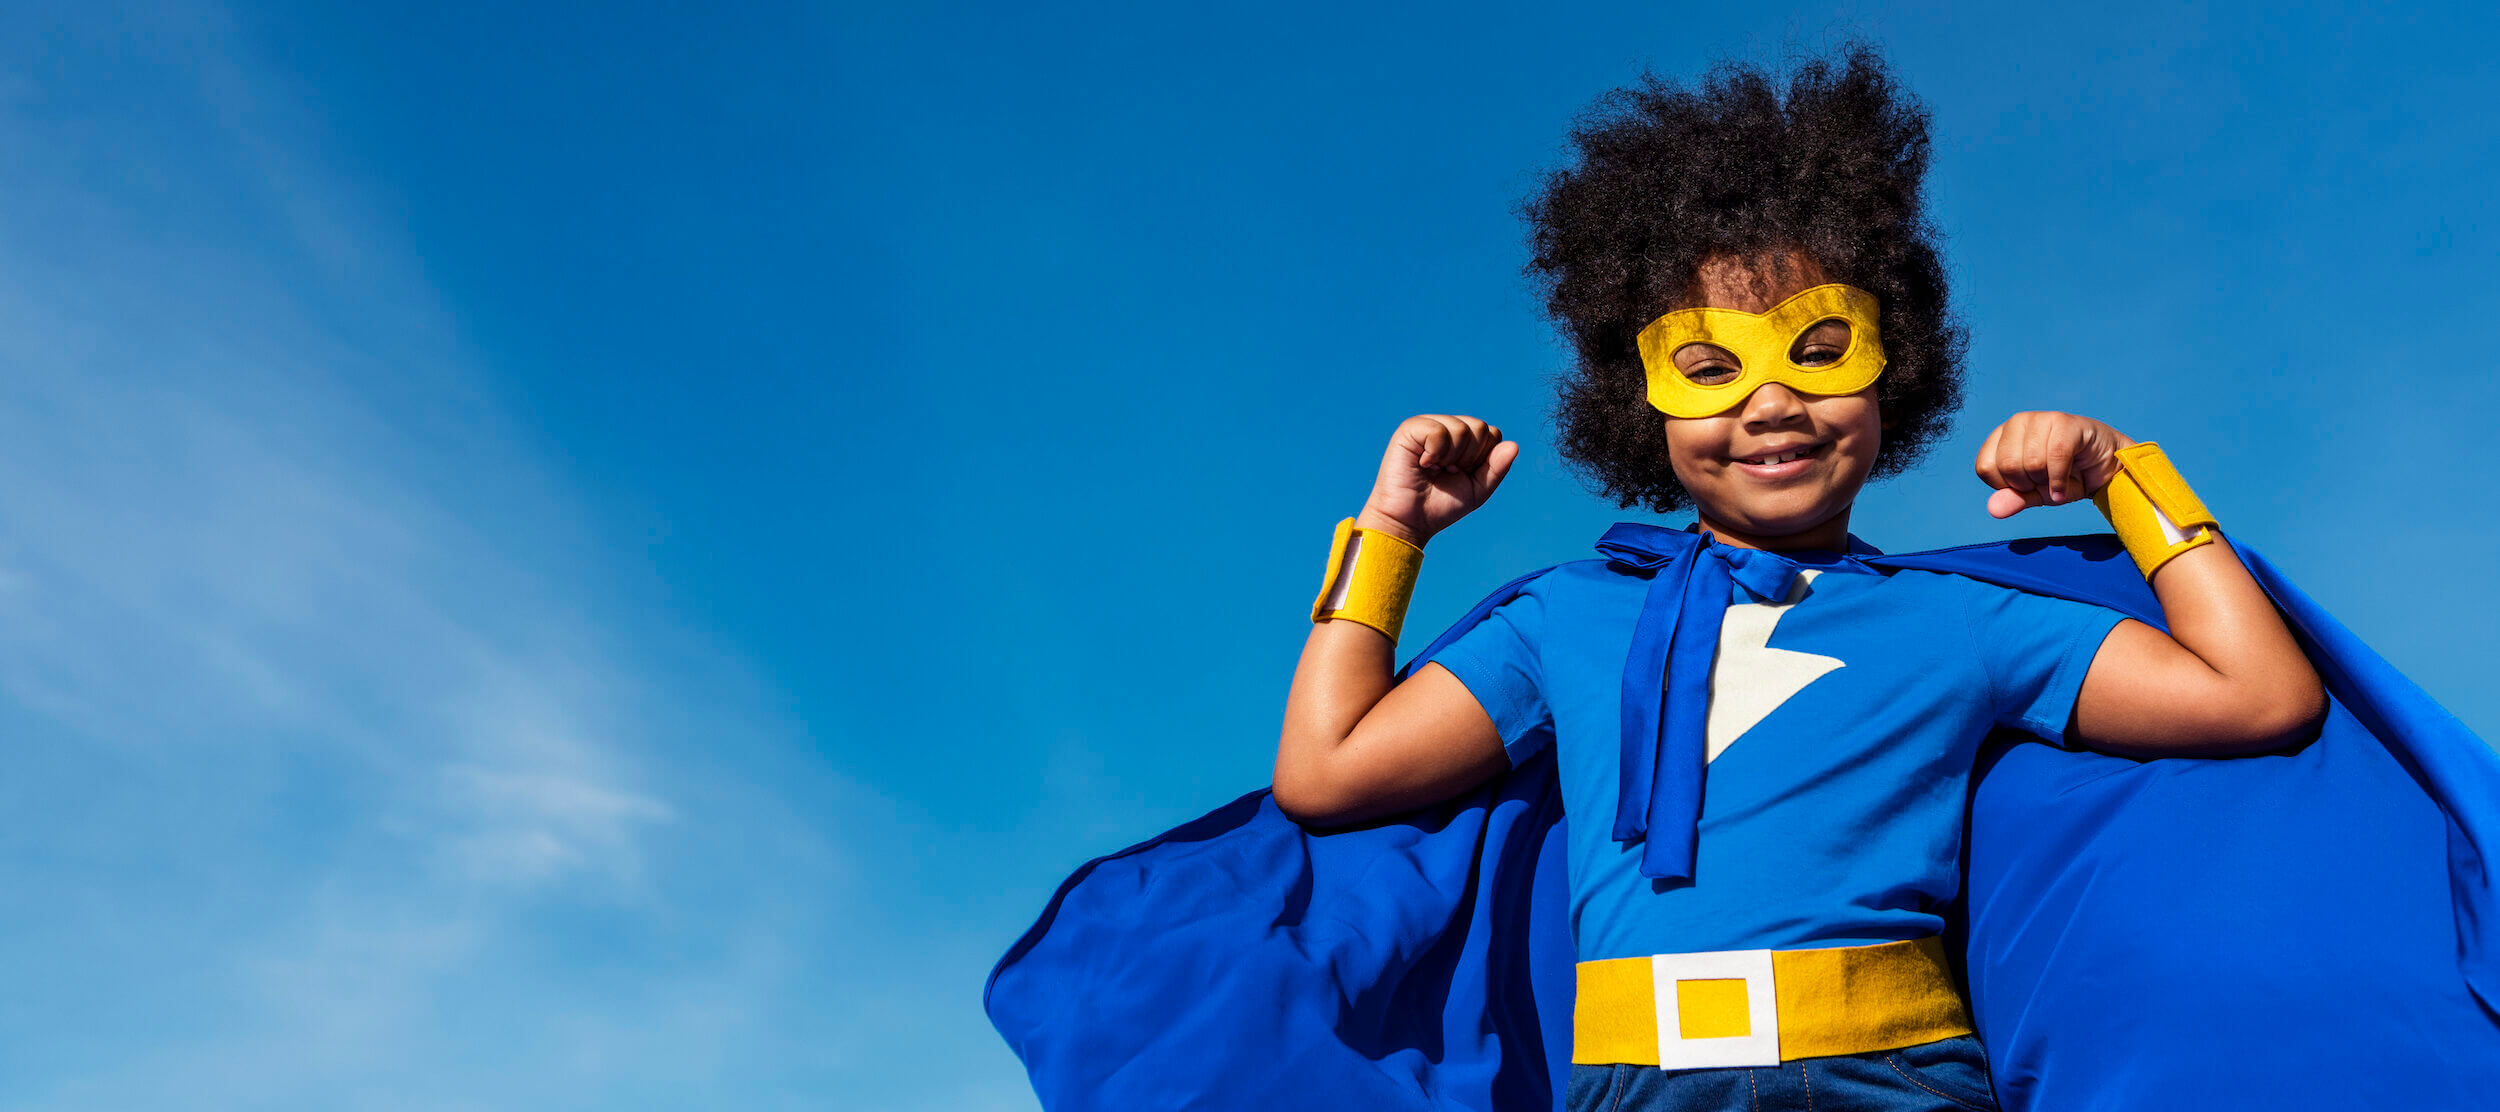 Cute Little Superhero Girl With Afro